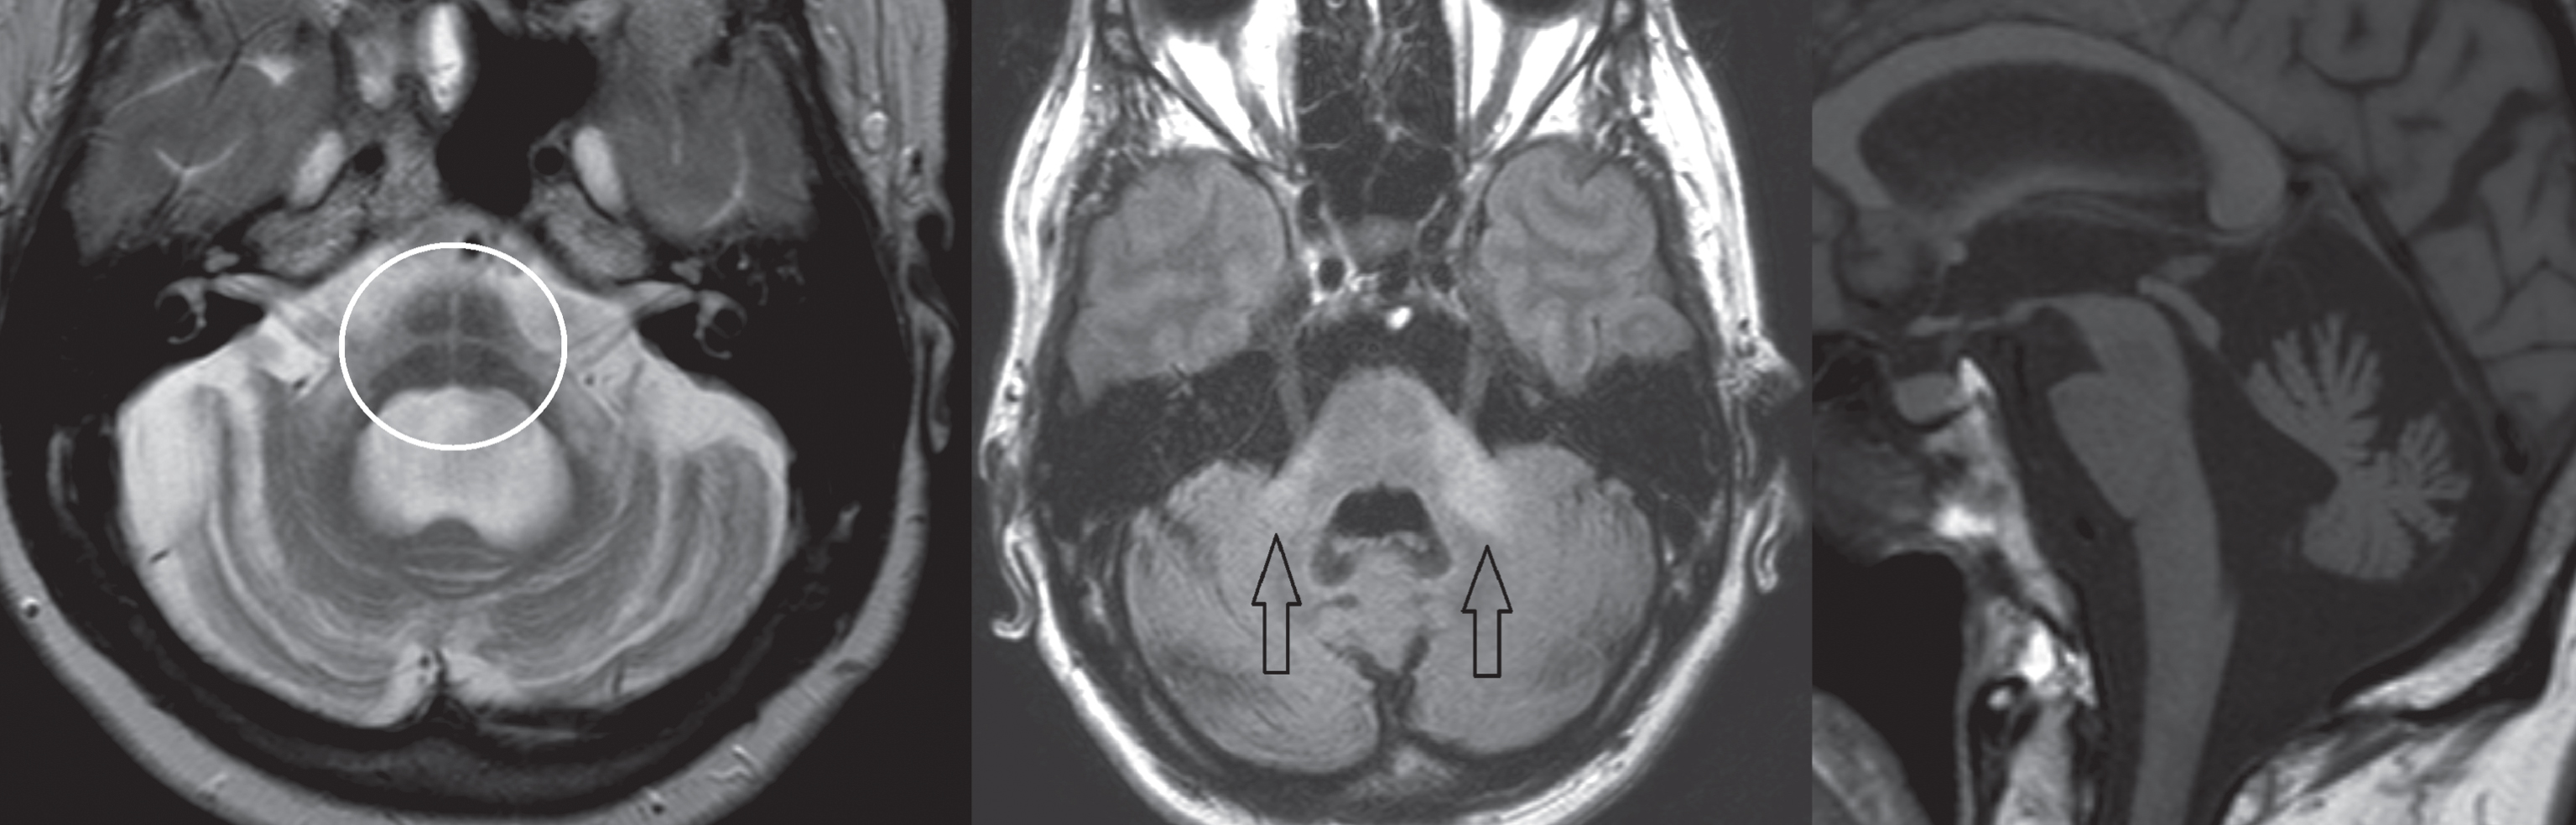 Subject diagnosed with the cerebellar form of MSA. Left image, T2-weighted transversal sequence demonstrating pontine atrophy with the ‘hot cross bun’ sign (encircled). Middle image, FLAIR hyper-intense signal intensity changes of the middle cerebellar peduncles (arrows). Right image, T1-weighted sagittal plane demonstrating pontocerebellar atrophy.